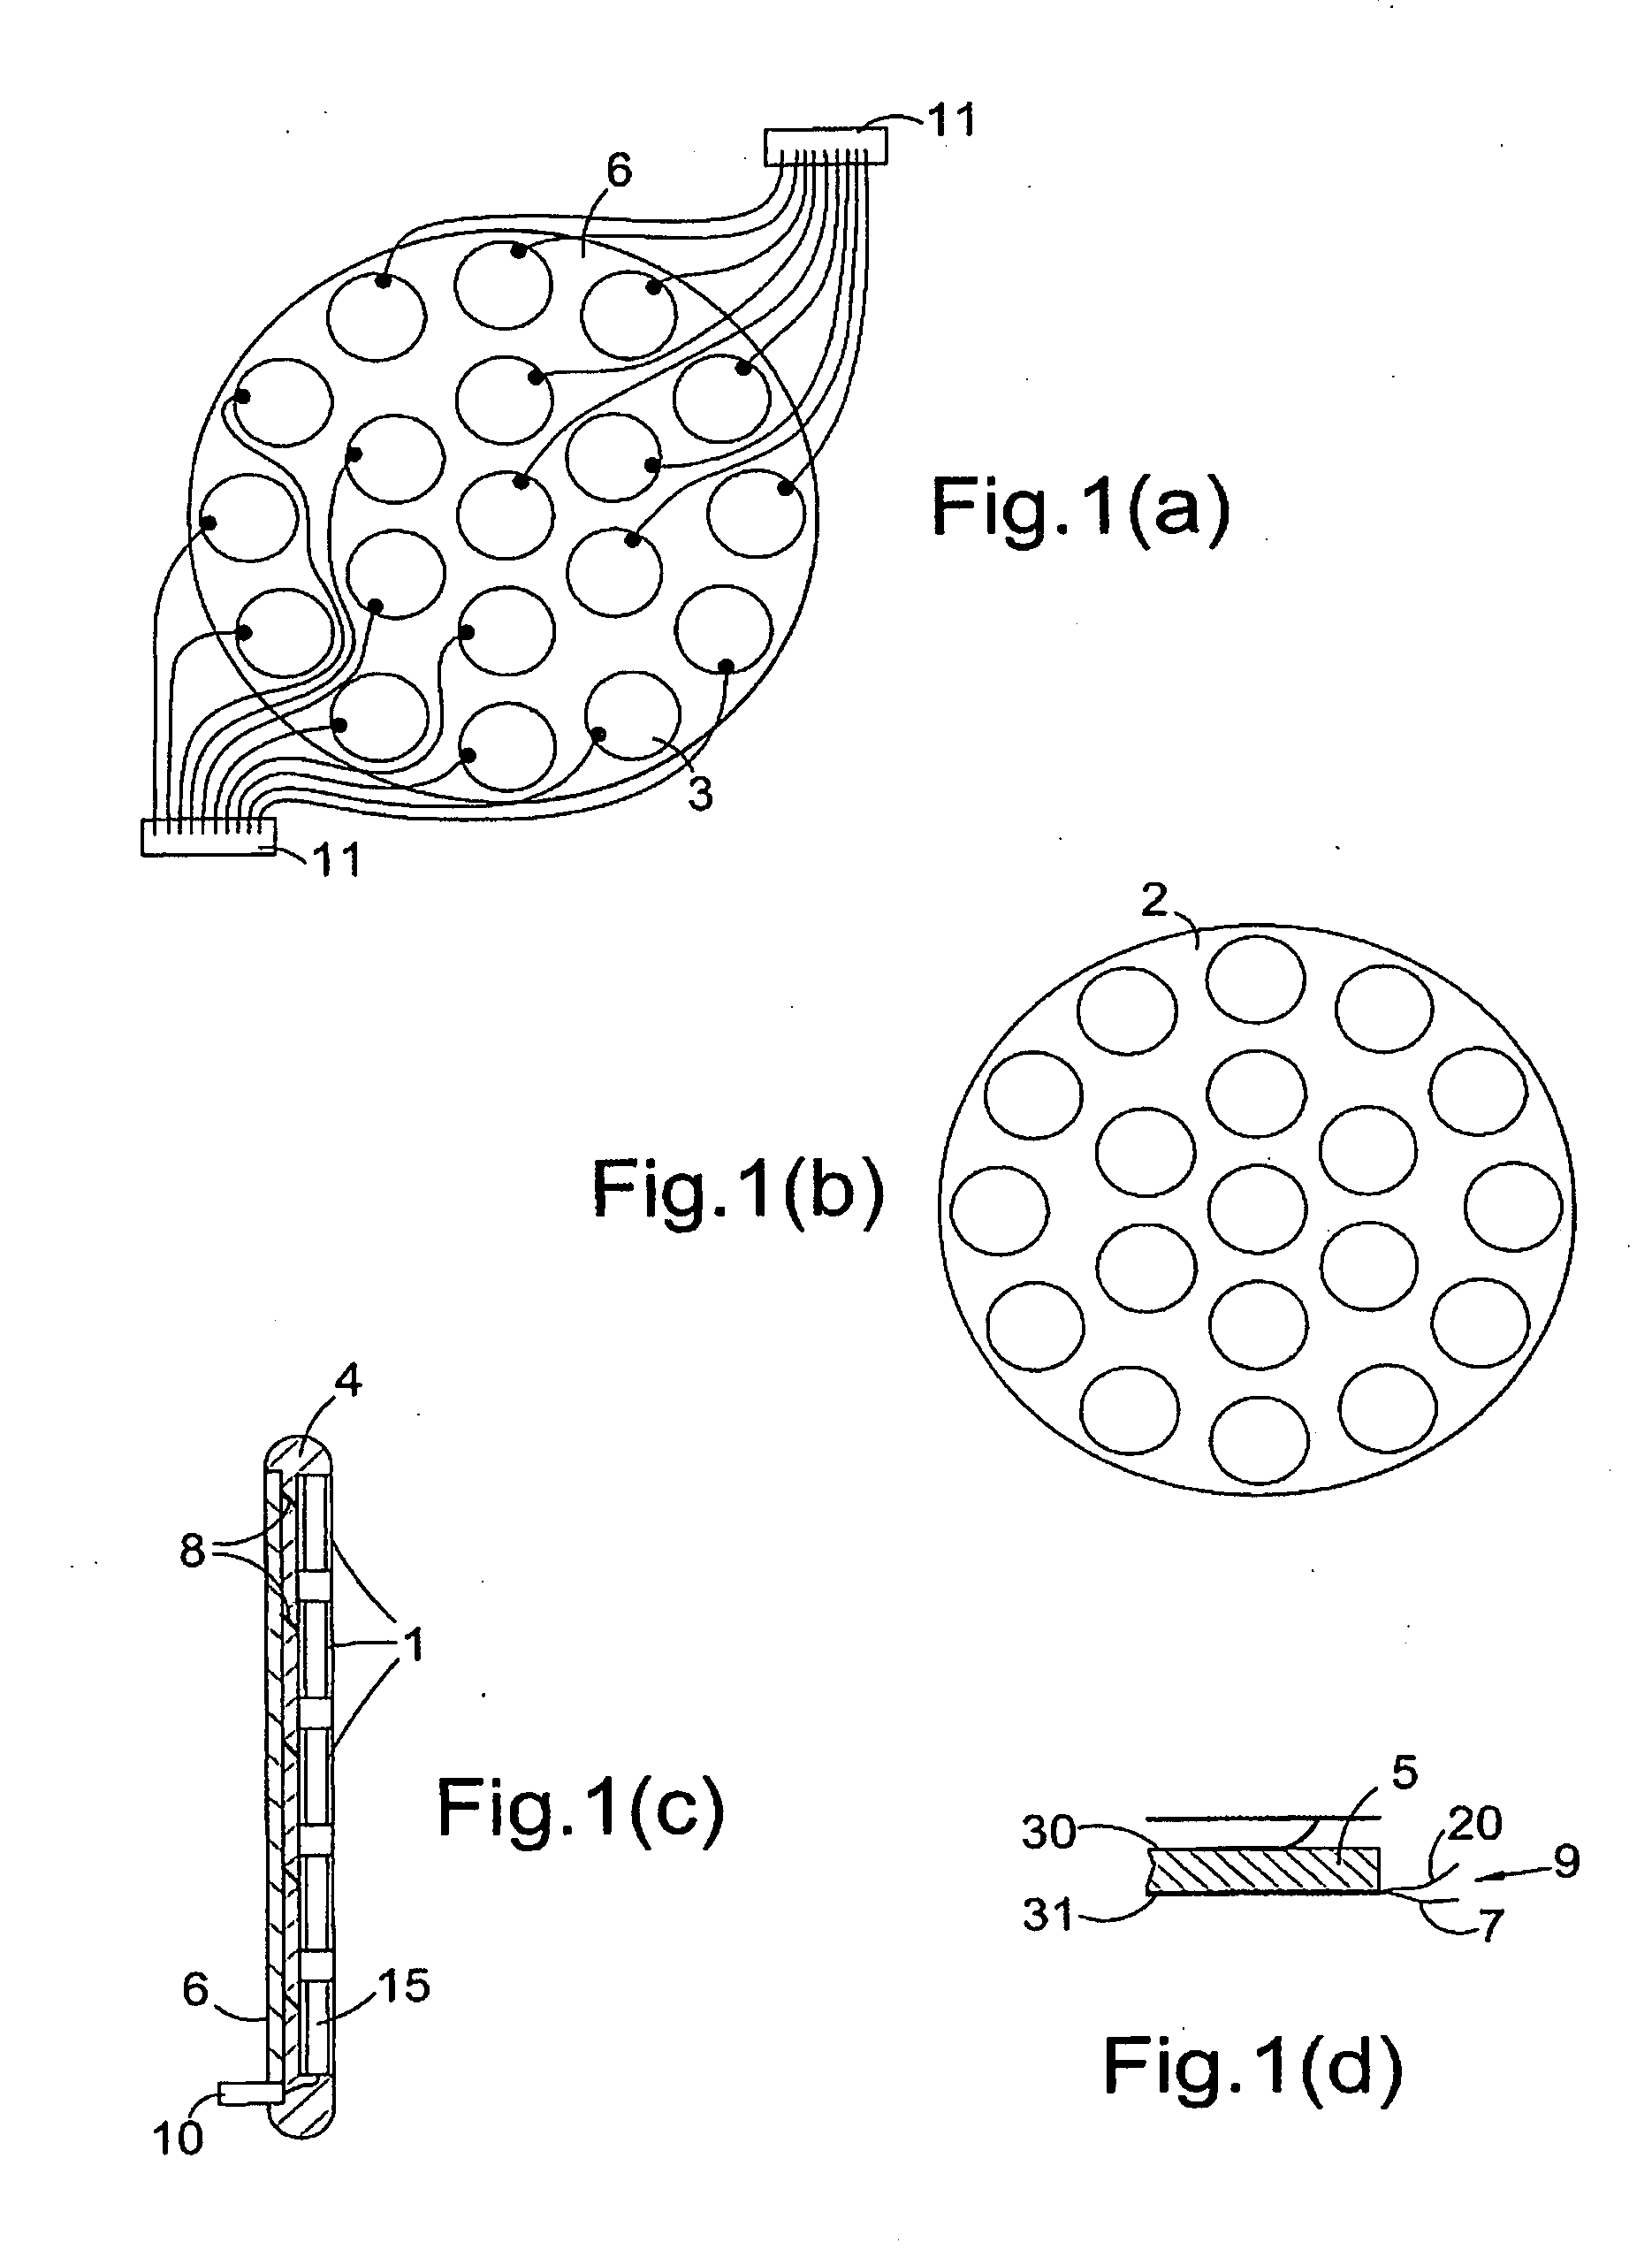 Apparatus for treatment of dermatological conditions